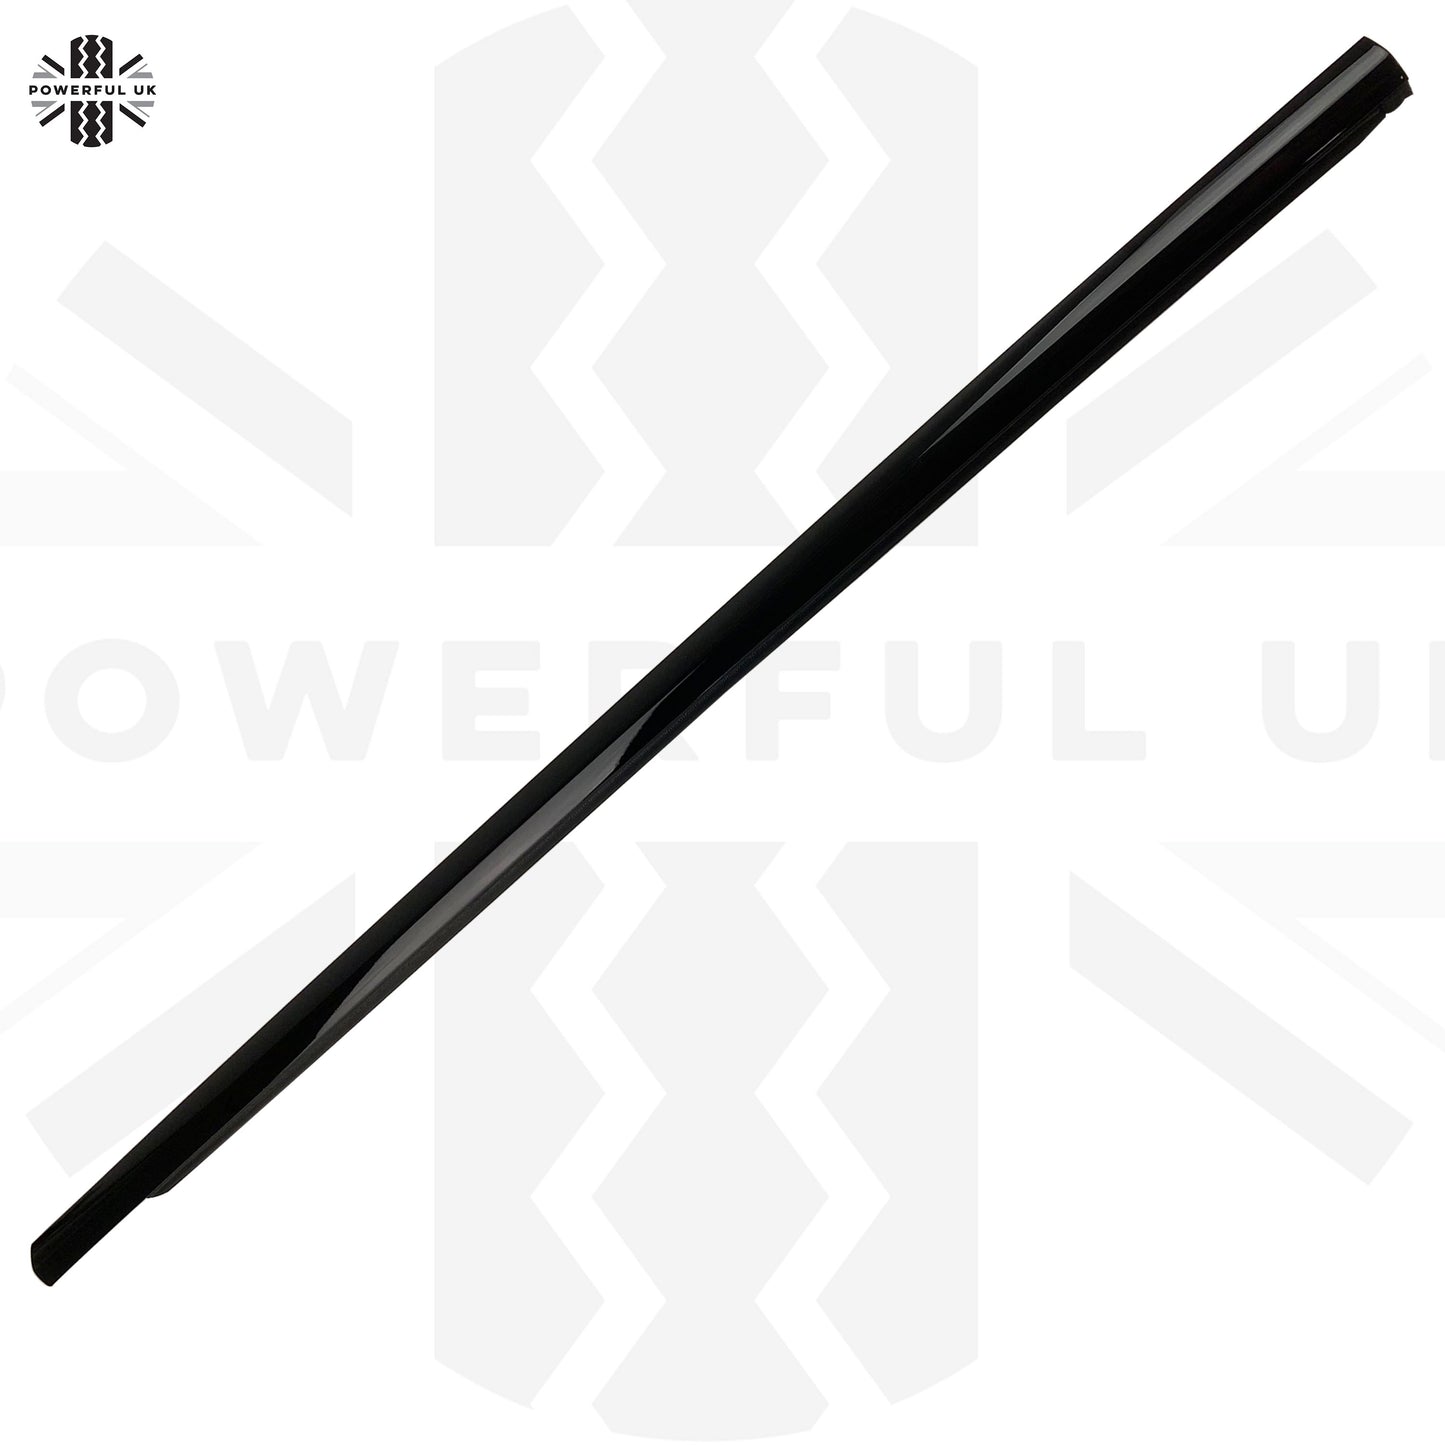 Genuine Front Right Window Moulding Trim for Range Rover Evoque